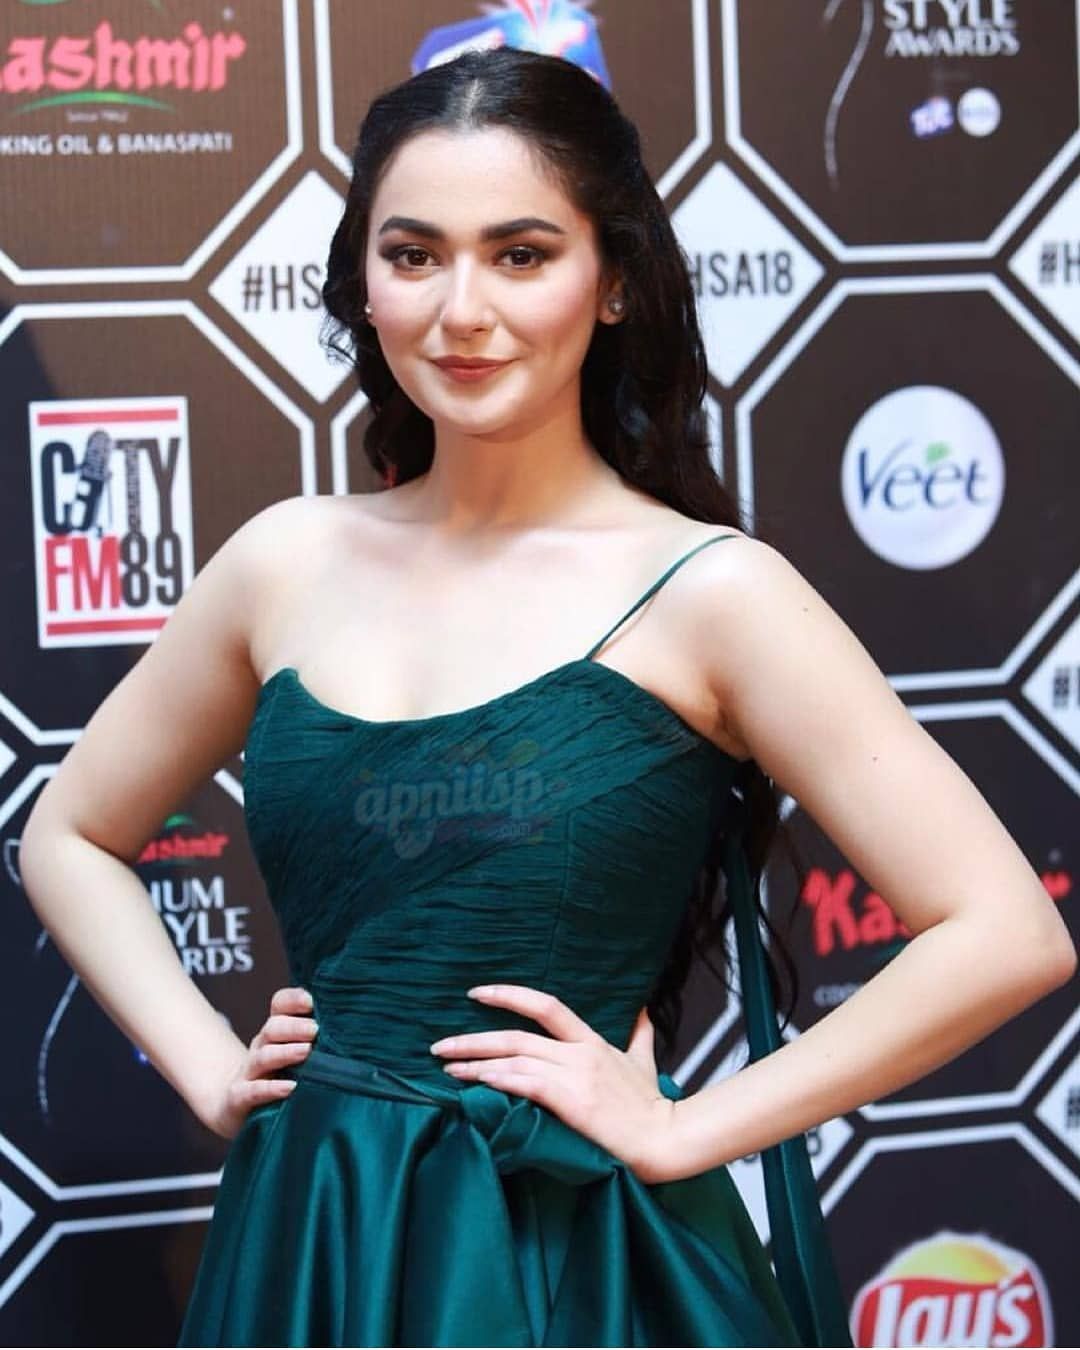 Hania Amir is the innocent face of Pakistan Showbiz Industry that no one can ever ignore. She is not only an amazing actress but also gorgeous enough that it's difficult for fans to take away the glance. Her beautiful smile makes her look adorable in whatever she opts to wear. Hania has been working for different projects and marked brilliance while gaining a huge number of fans. However, there have been those moments when she had to face great criticism over the bold dressing. Here we have compiled a collection of bold pictures of Hania Amir you might have missed! Take a look!